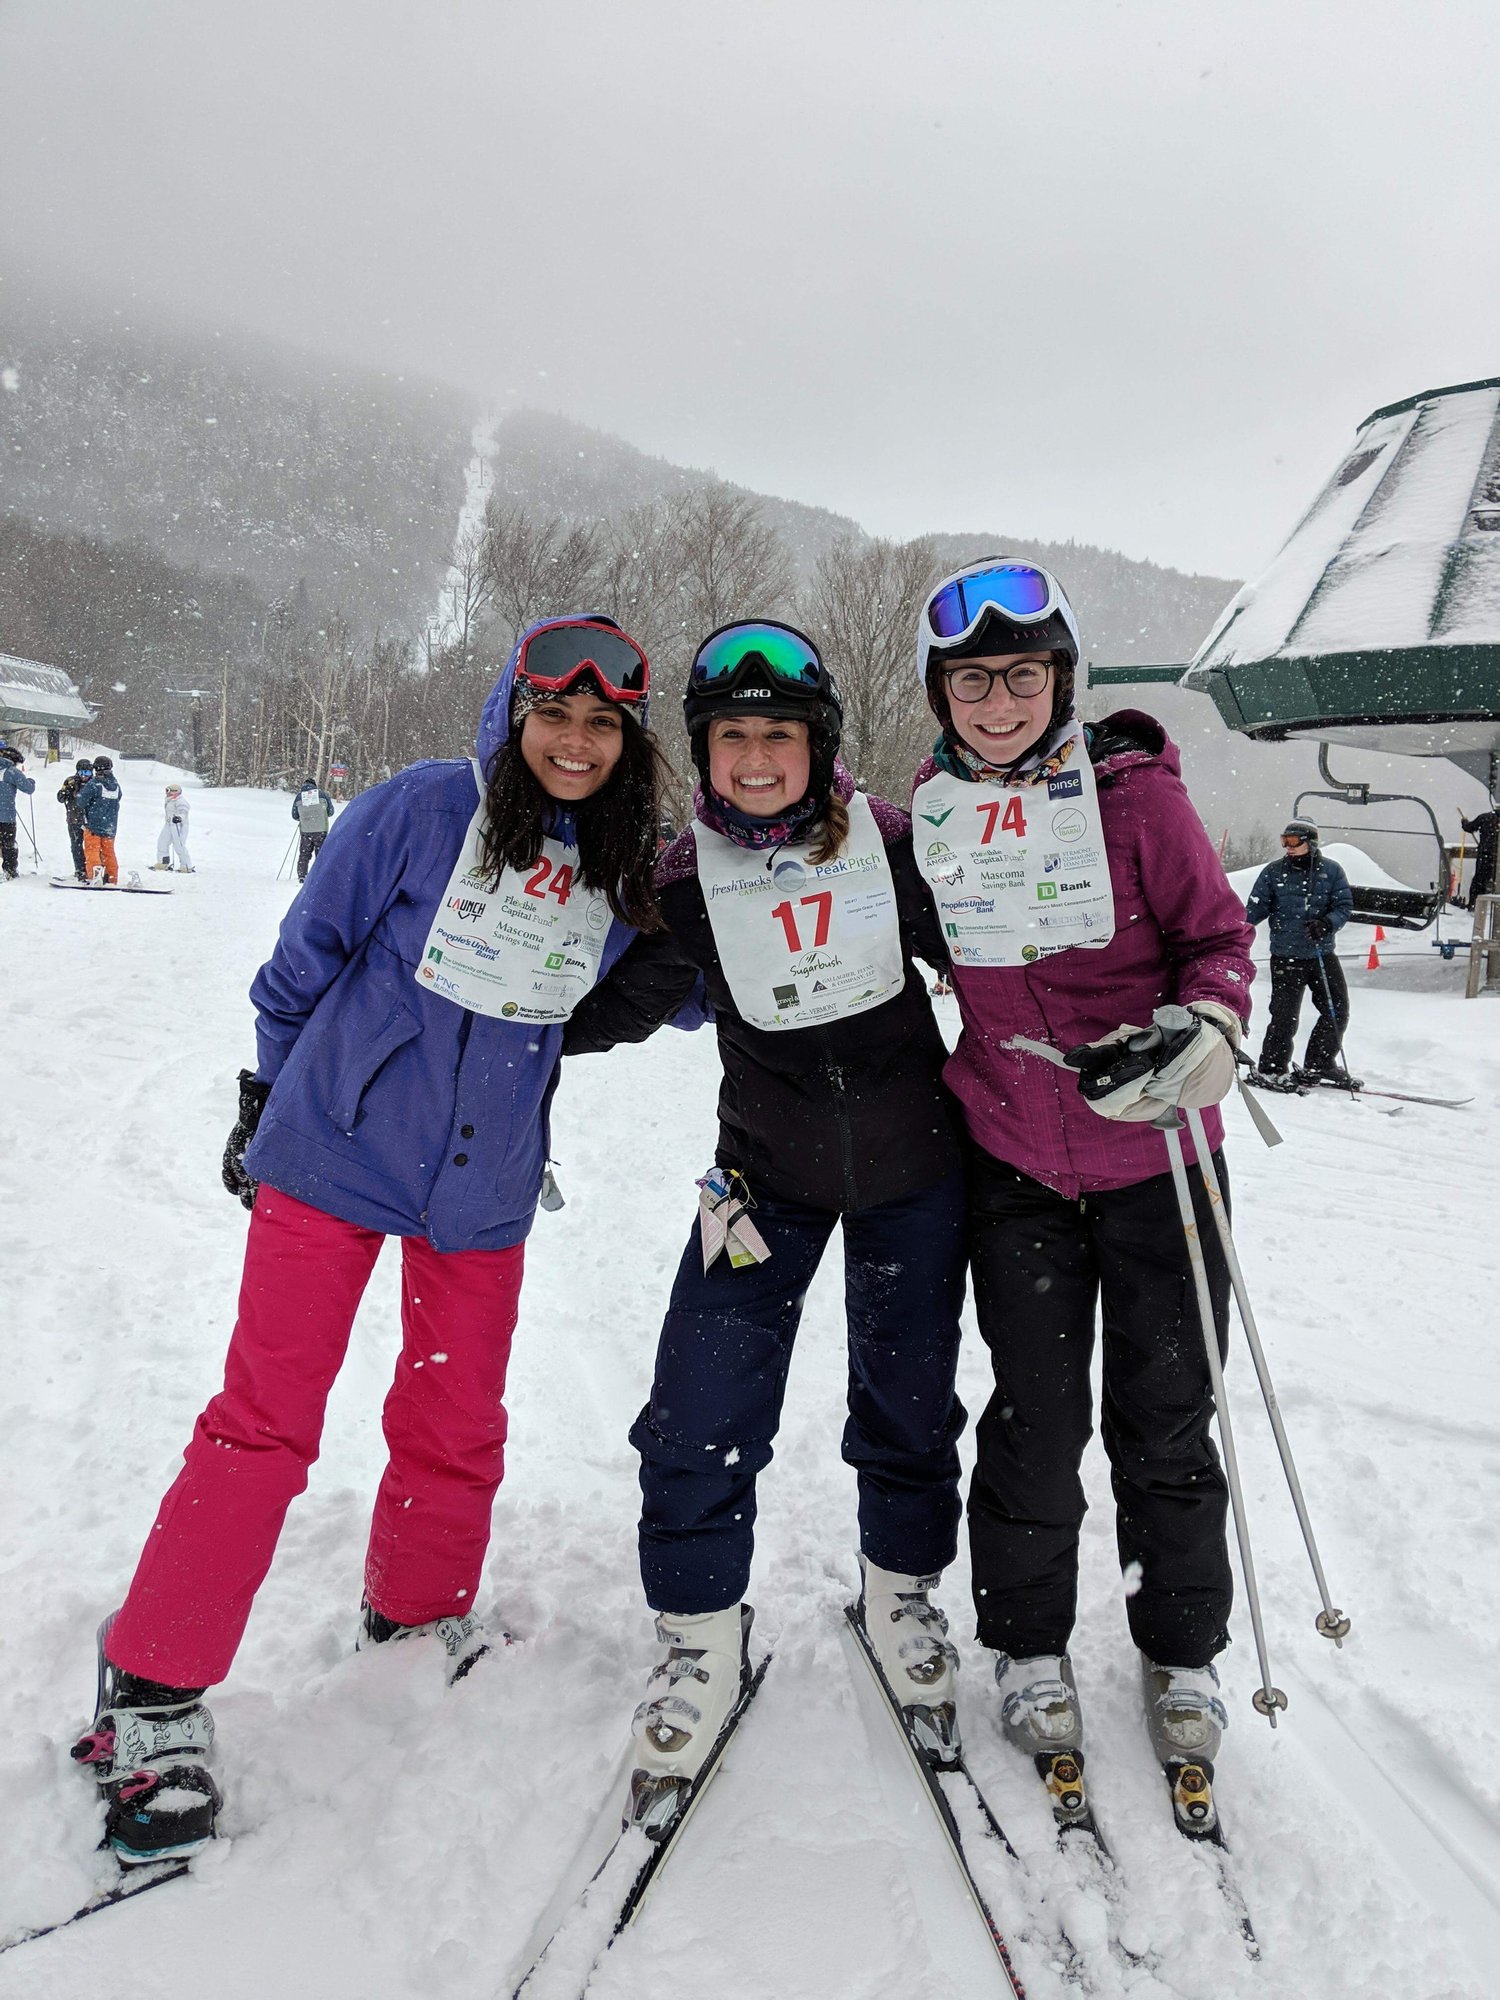 The founding team representing SheFly at Peak Pitch in Sugarbush, Vermont.